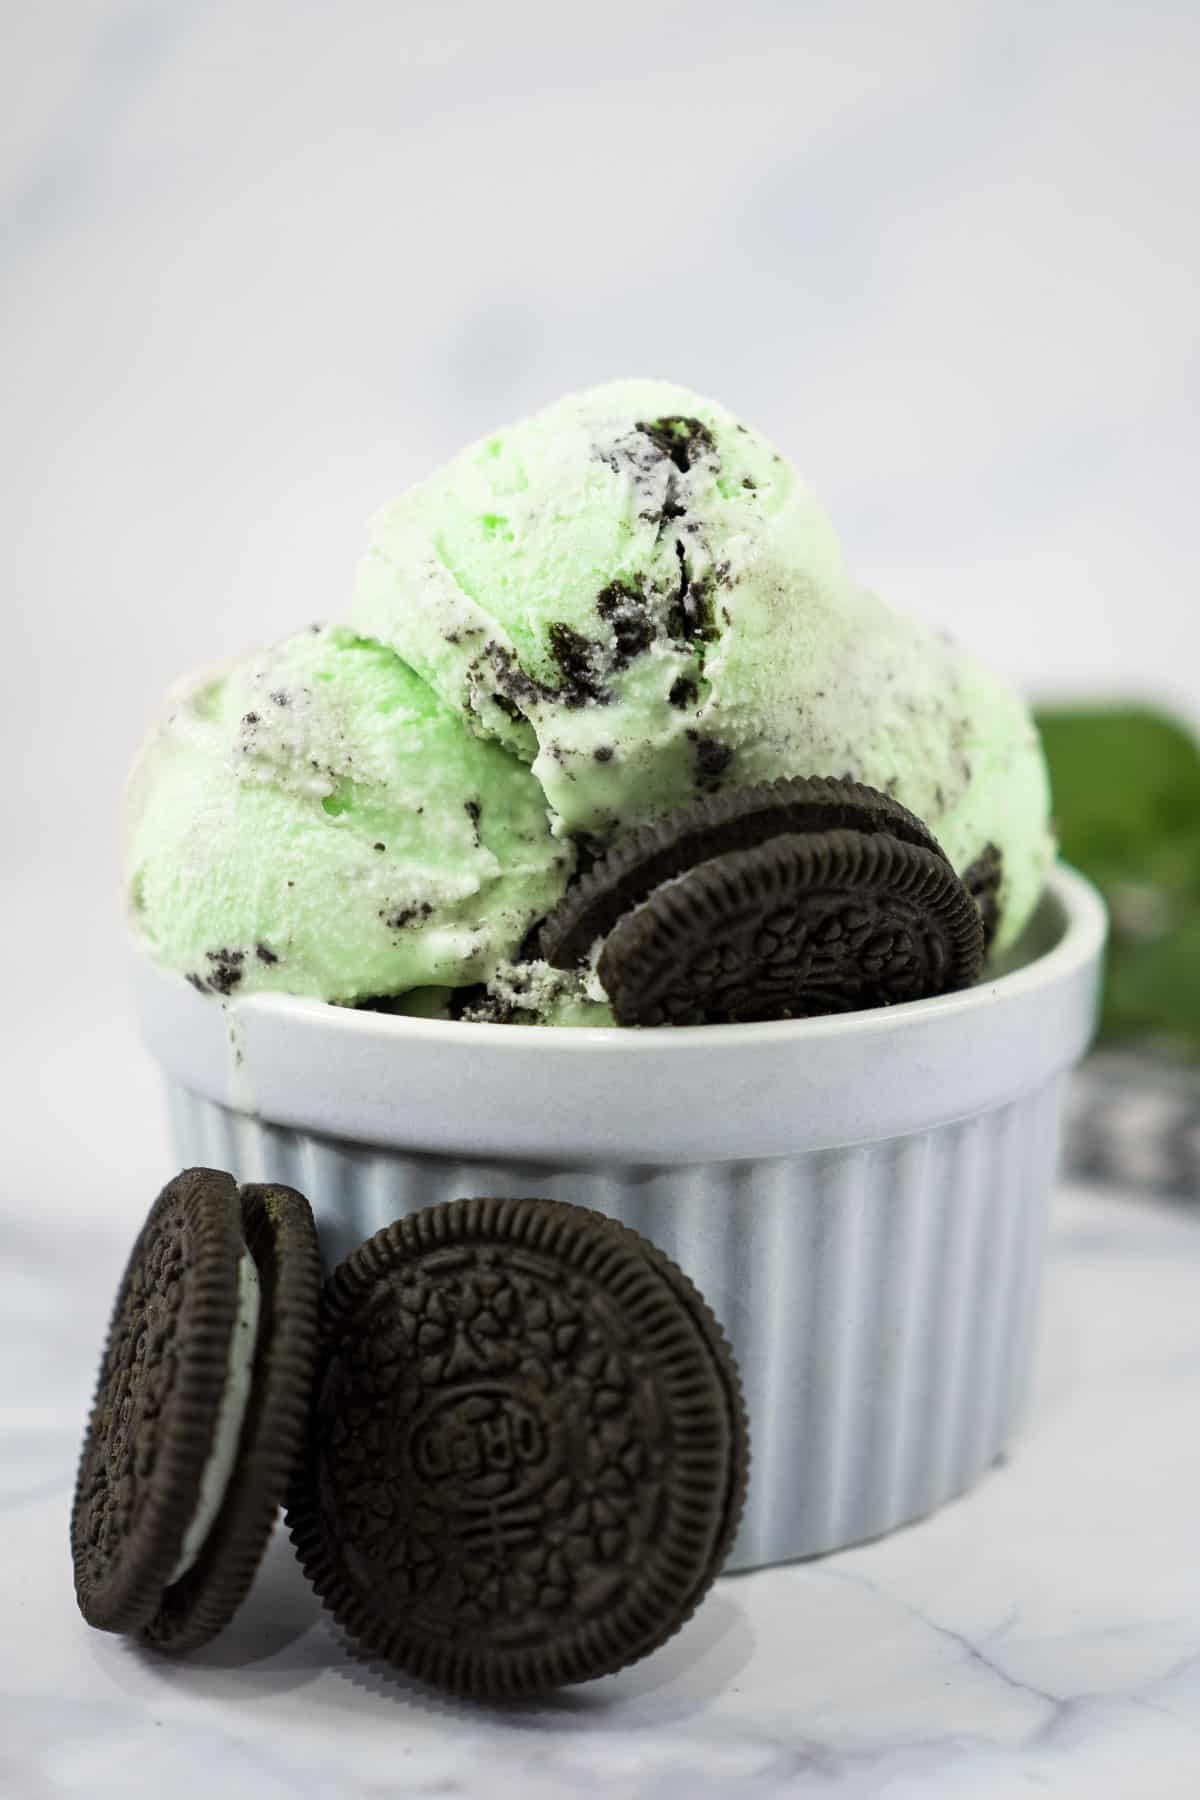 Green mint ice cream scoops in a small white bowl